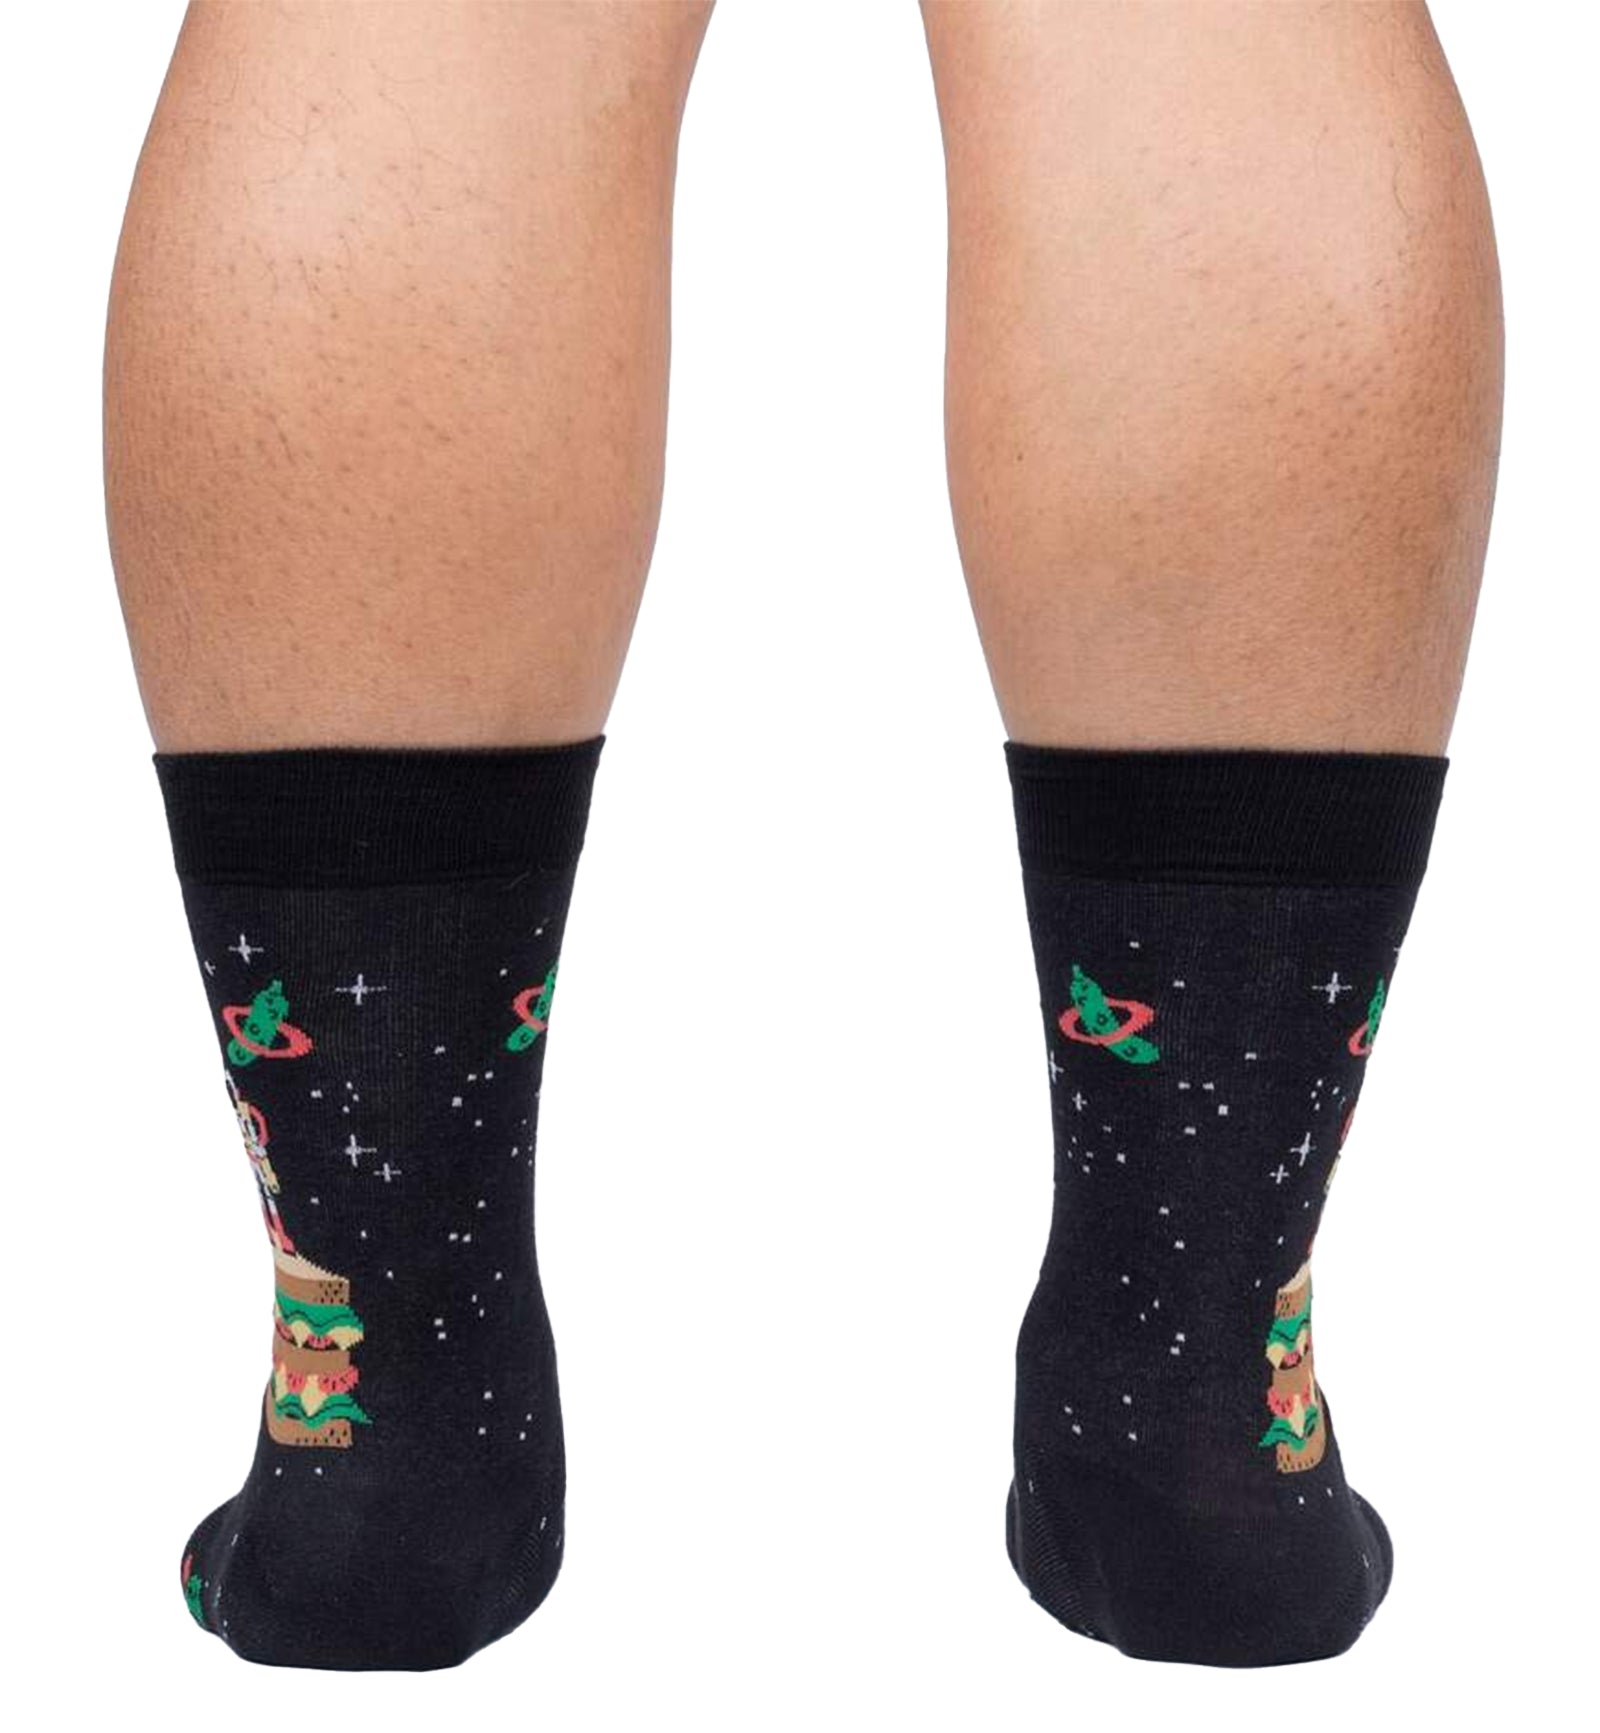 SOCK it to me Men's Crew Socks (mef0532),The Moon Club - The Moon Club,One Size